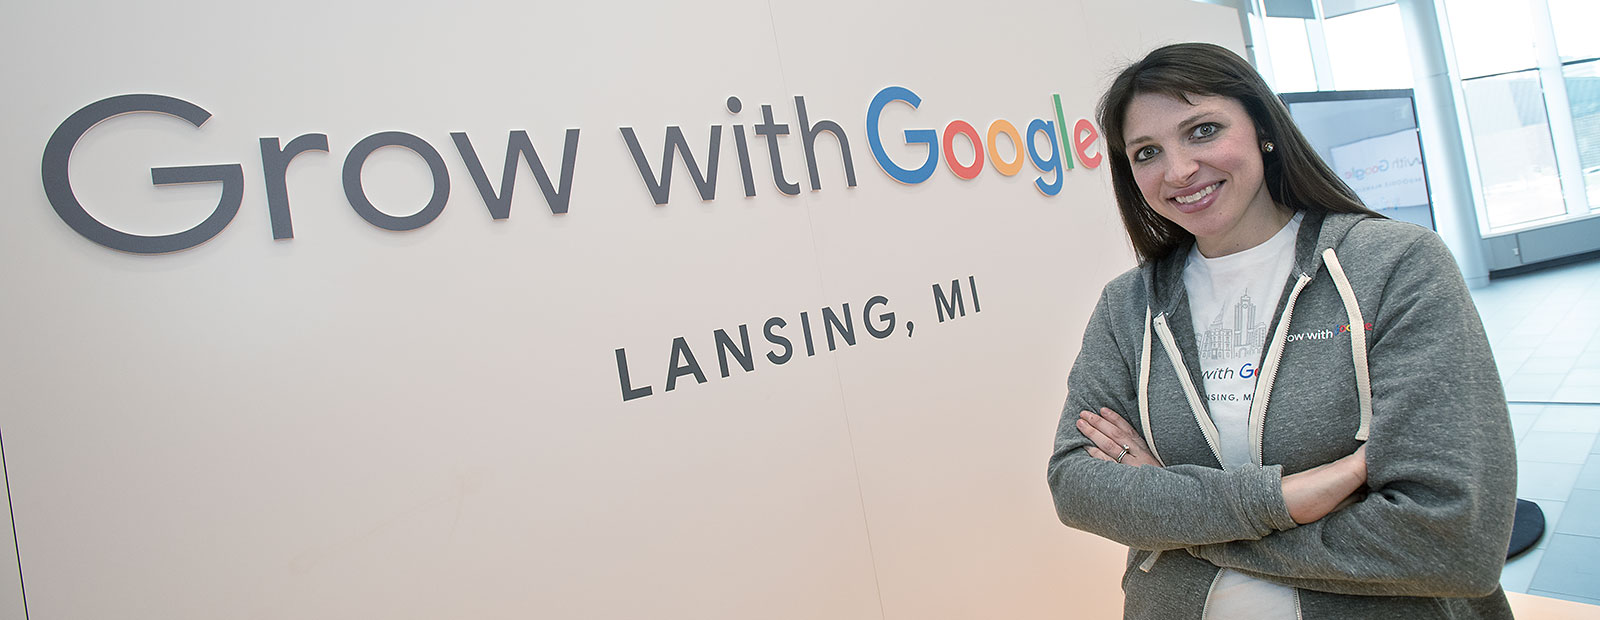 Emily Hanley of Google at the Grow with Google event in Lansing - Photo Dave Trumpie